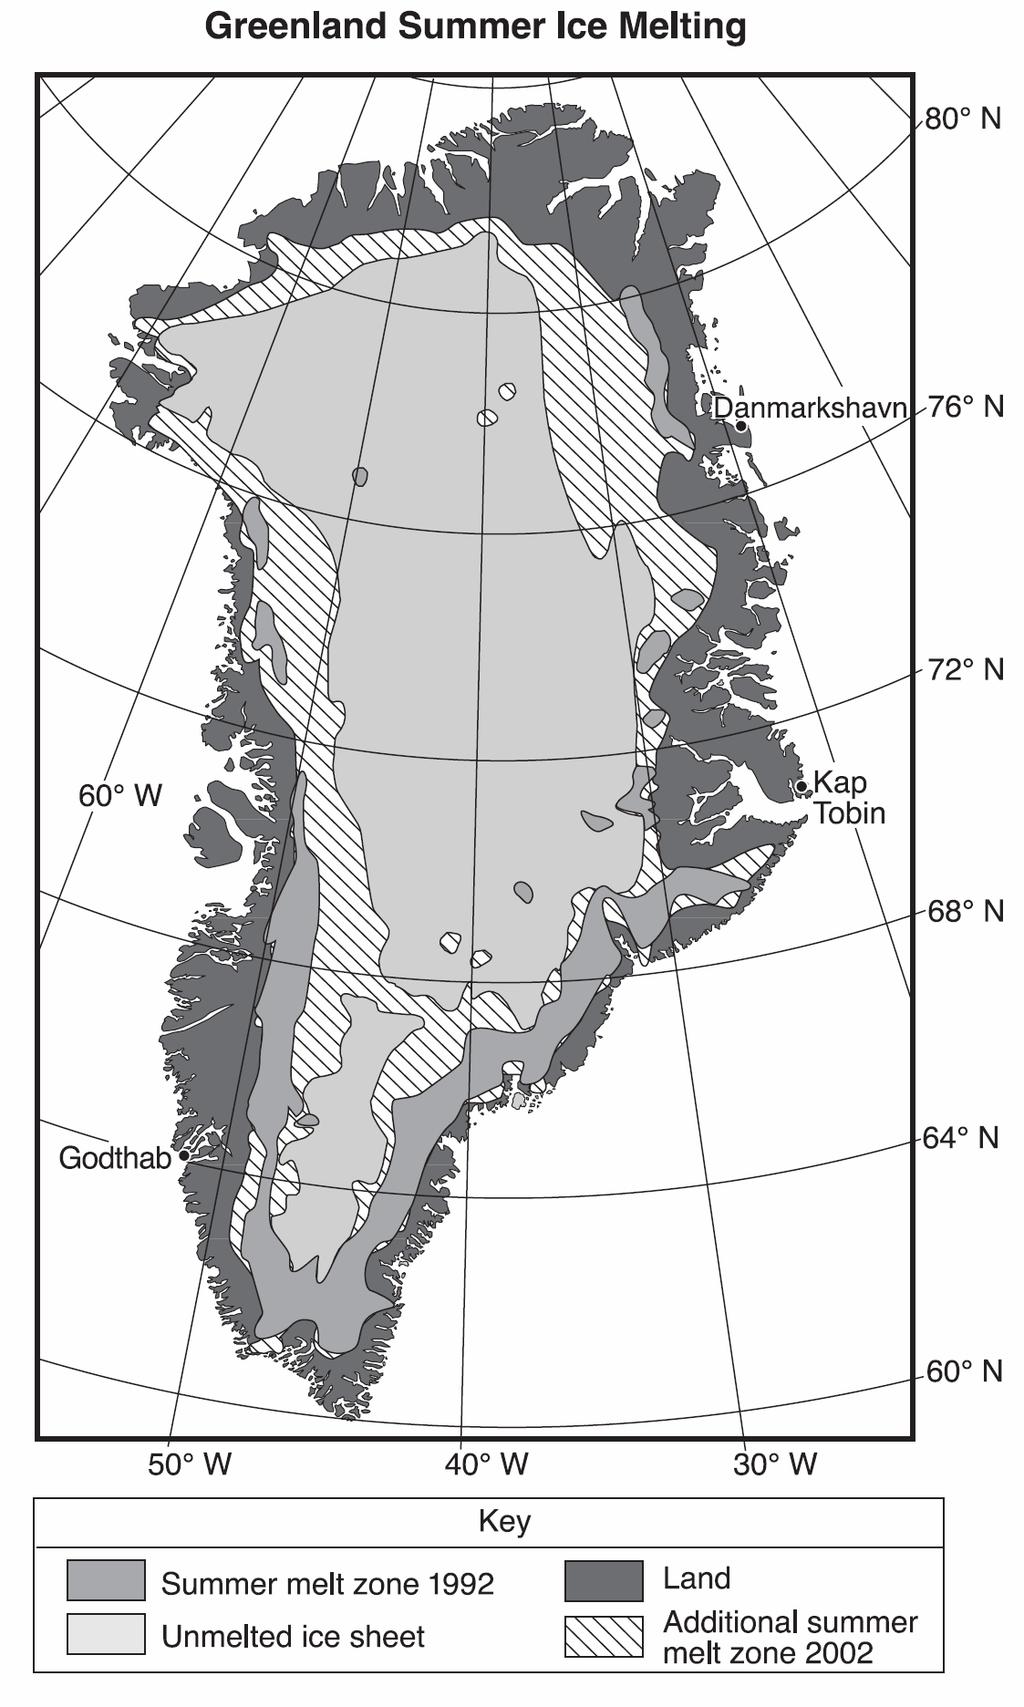 18. Base your answer to the following question on the following map and passage. The map shows the extent of summer ice-melt zones on Greenland in 1992 and 2002.